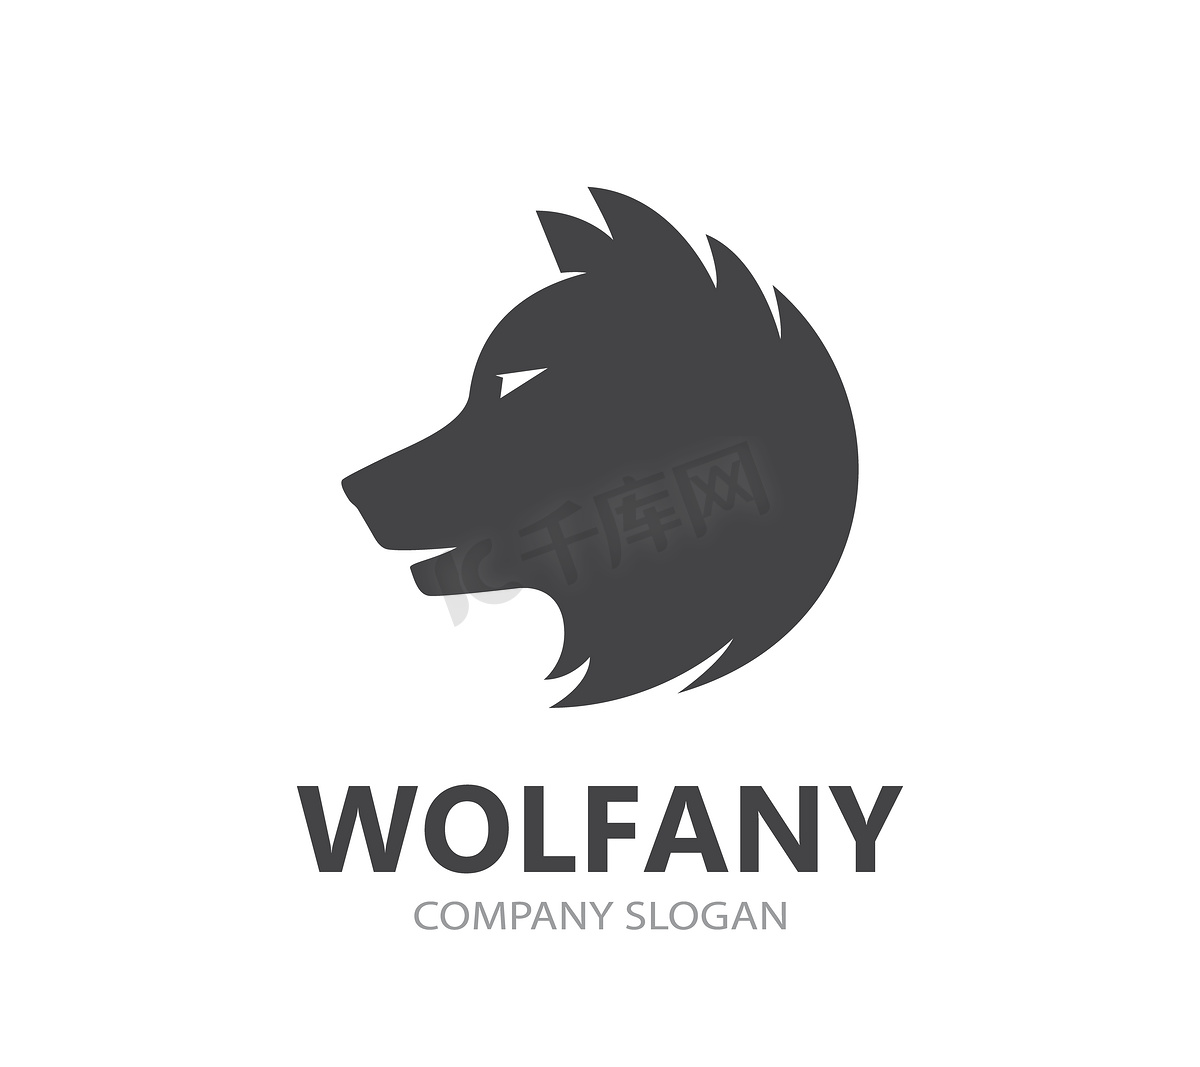 wolf and predator logo combination. Beast and dog symbol or icon. Unique wildlife and hunter logotype design template.图片